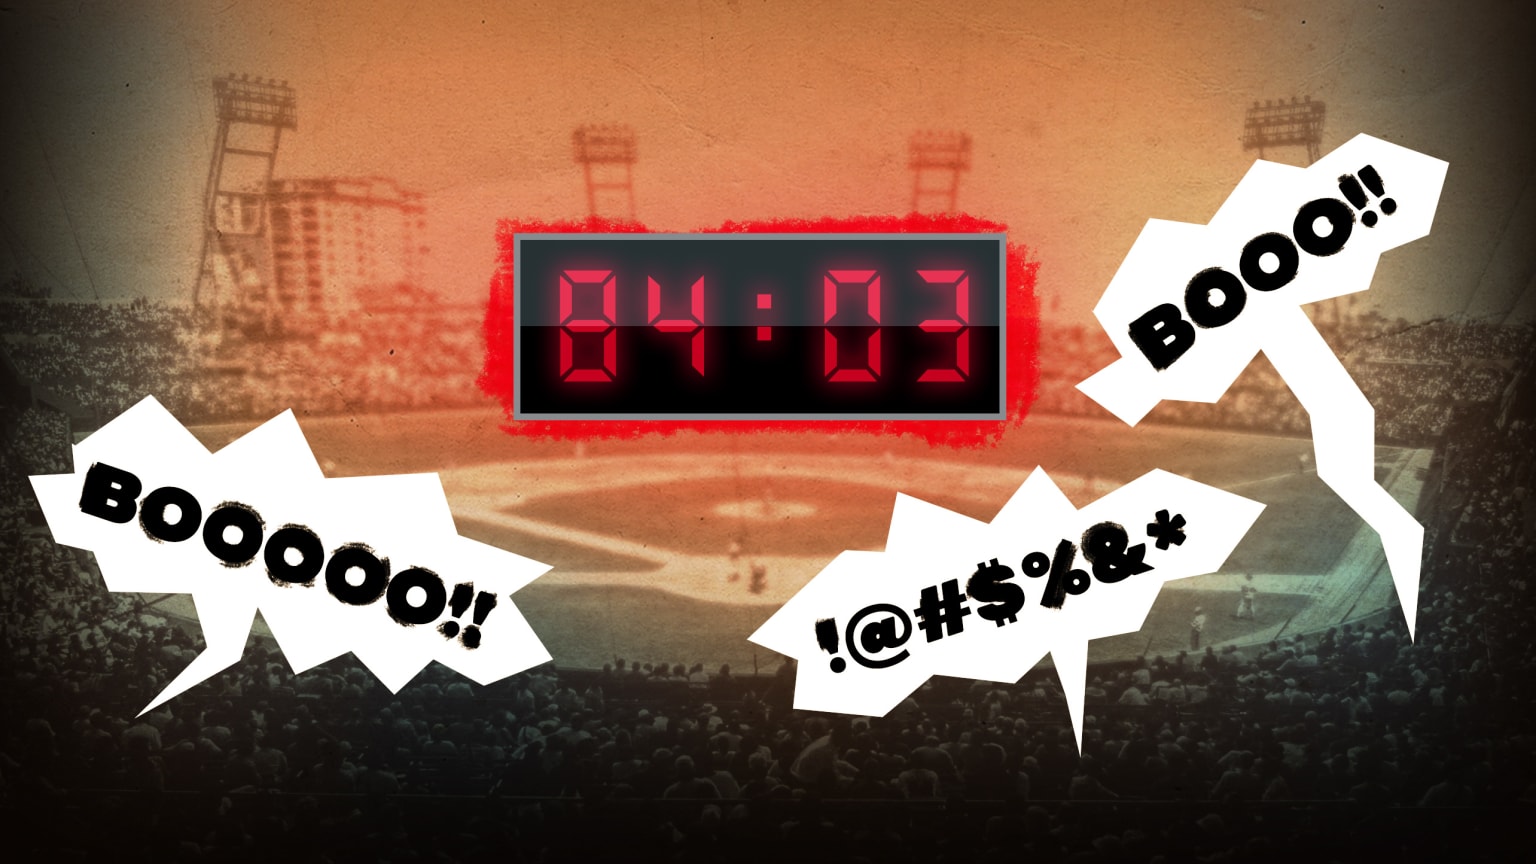 A photo illustration shows a digital clock with a baseball stadium in the background